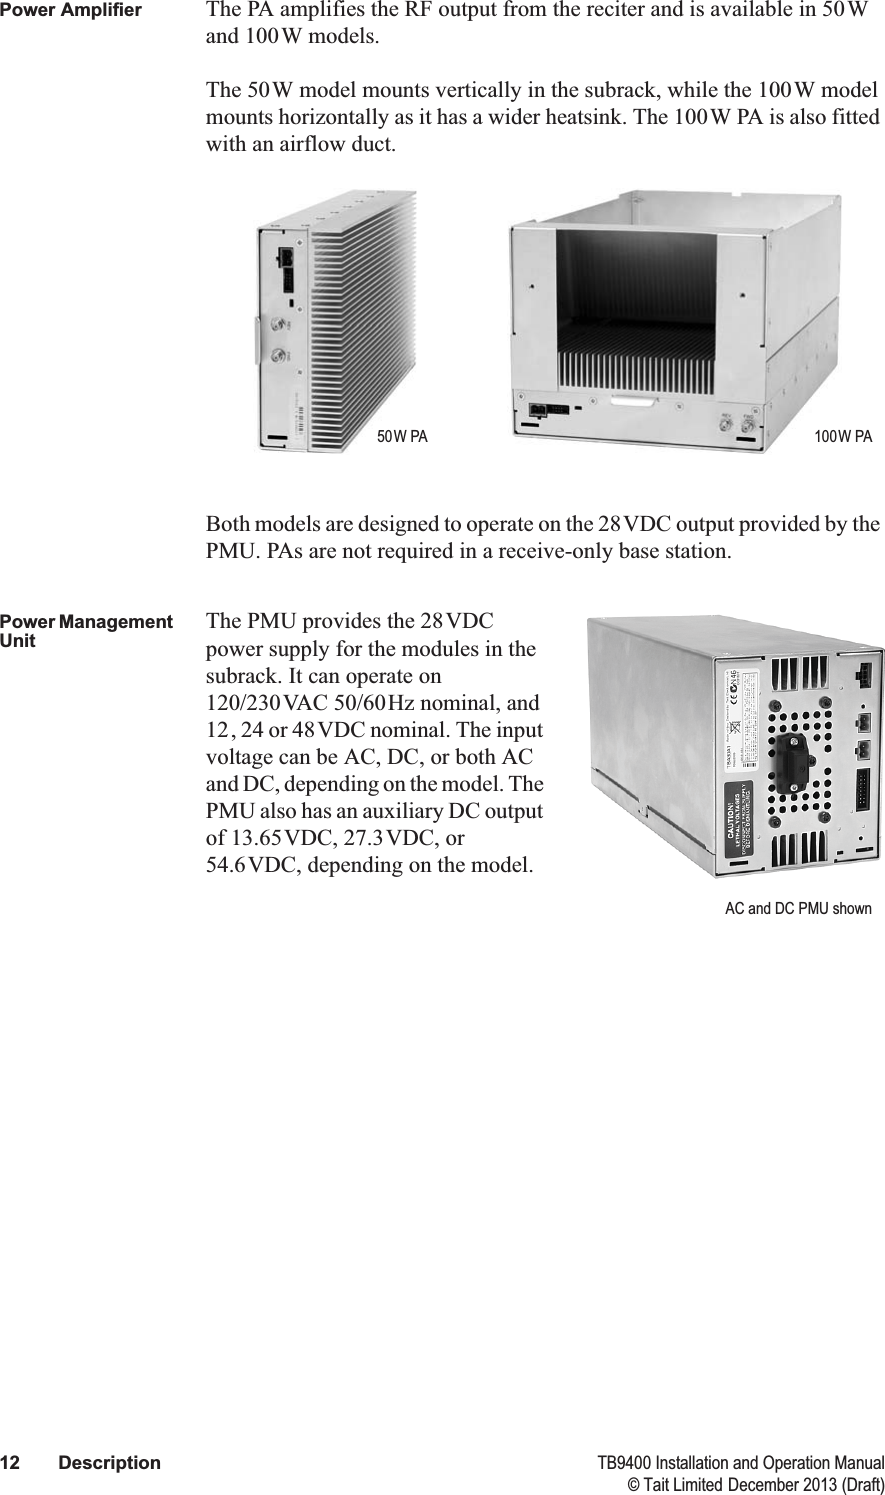  12 Description TB9400 Installation and Operation Manual© Tait Limited December 2013 (Draft)Power Amplifier The PA amplifies the RF output from the reciter and is available in 50W and 100W models.The 50W model mounts vertically in the subrack, while the 100W model mounts horizontally as it has a wider heatsink. The 100W PA is also fitted with an airflow duct.Both models are designed to operate on the 28VDC output provided by the PMU. PAs are not required in a receive-only base station.Power Management UnitThe PMU provides the 28VDC power supply for the modules in the subrack. It can operate on 120/230VAC 50/60Hz nominal, and 12, 24 or 48VDC nominal. The input voltage can be AC, DC, or both AC and DC, depending on the model. The PMU also has an auxiliary DC output of 13.65VDC, 27.3VDC, or 54.6VDC, depending on the model.50W PA 100W PAAC and DC PMU shown